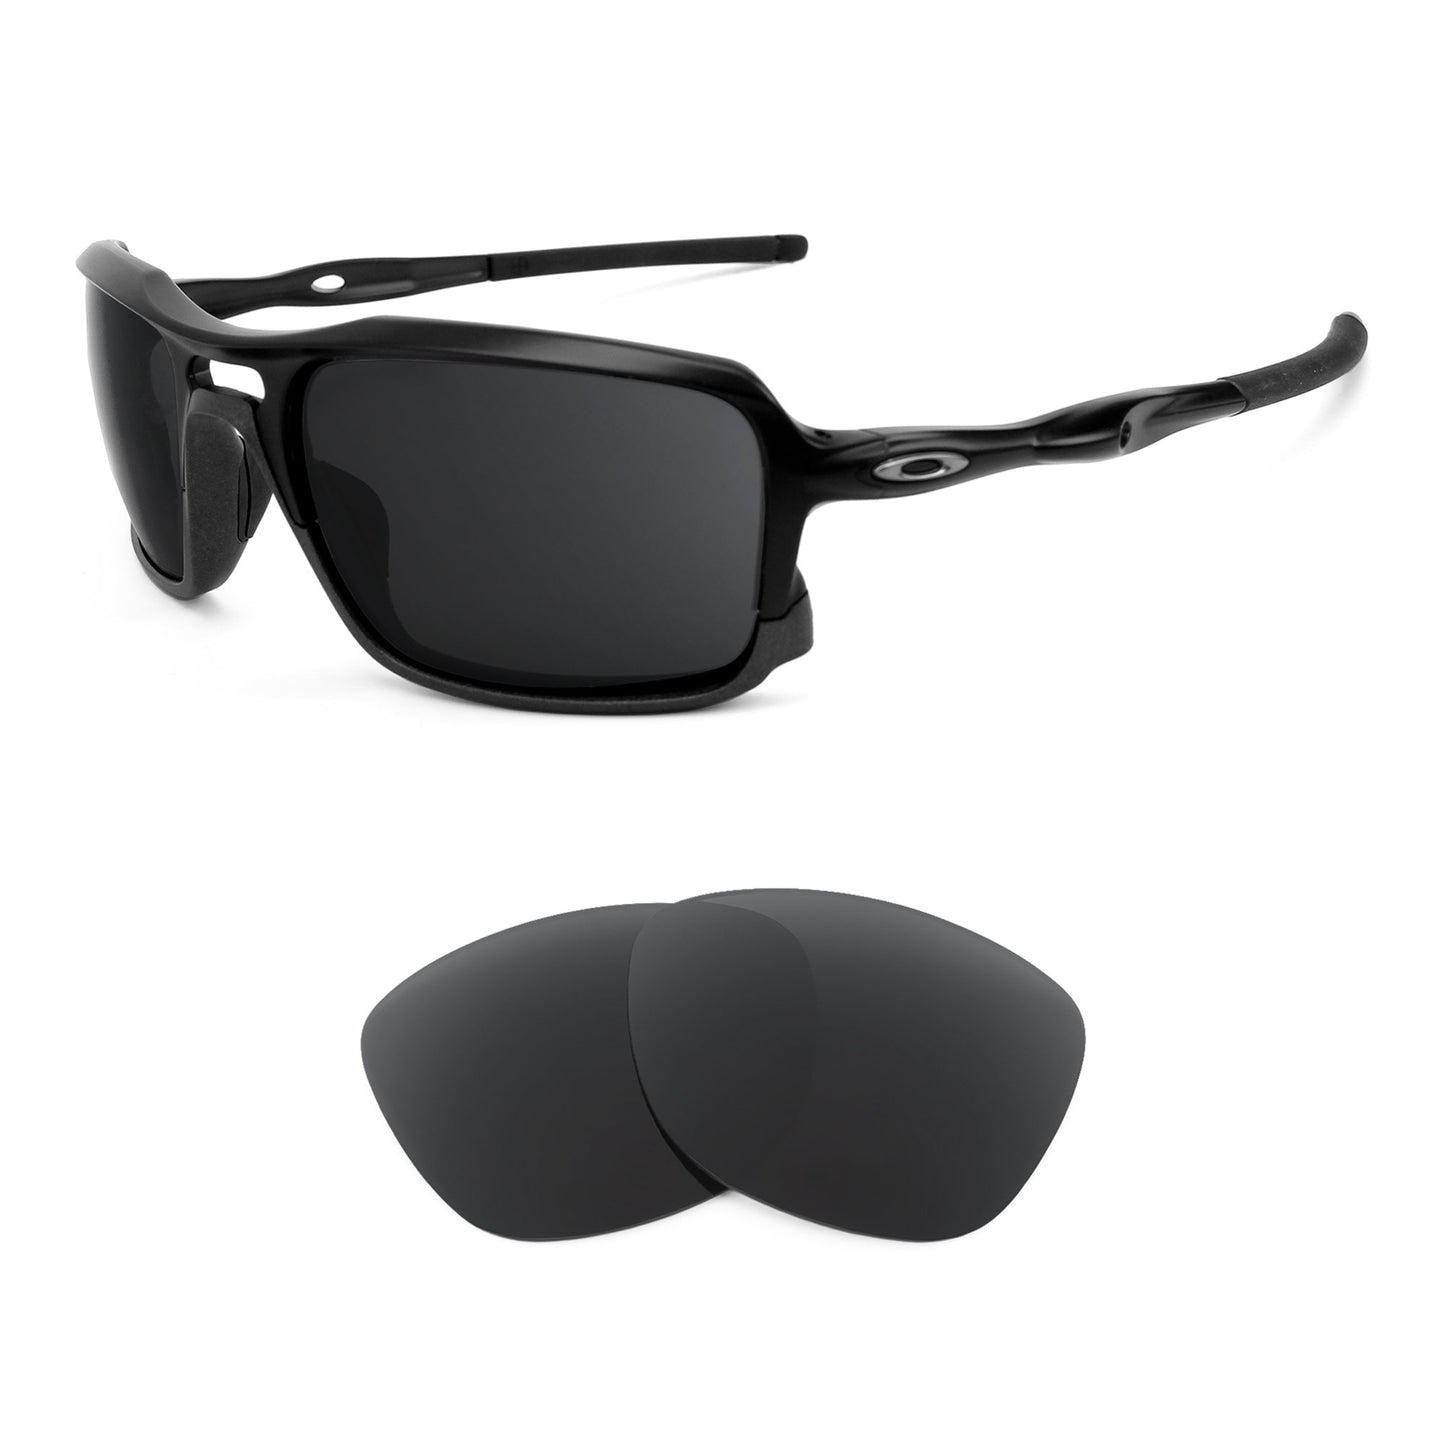 Oakley Triggerman sunglasses with replacement lenses